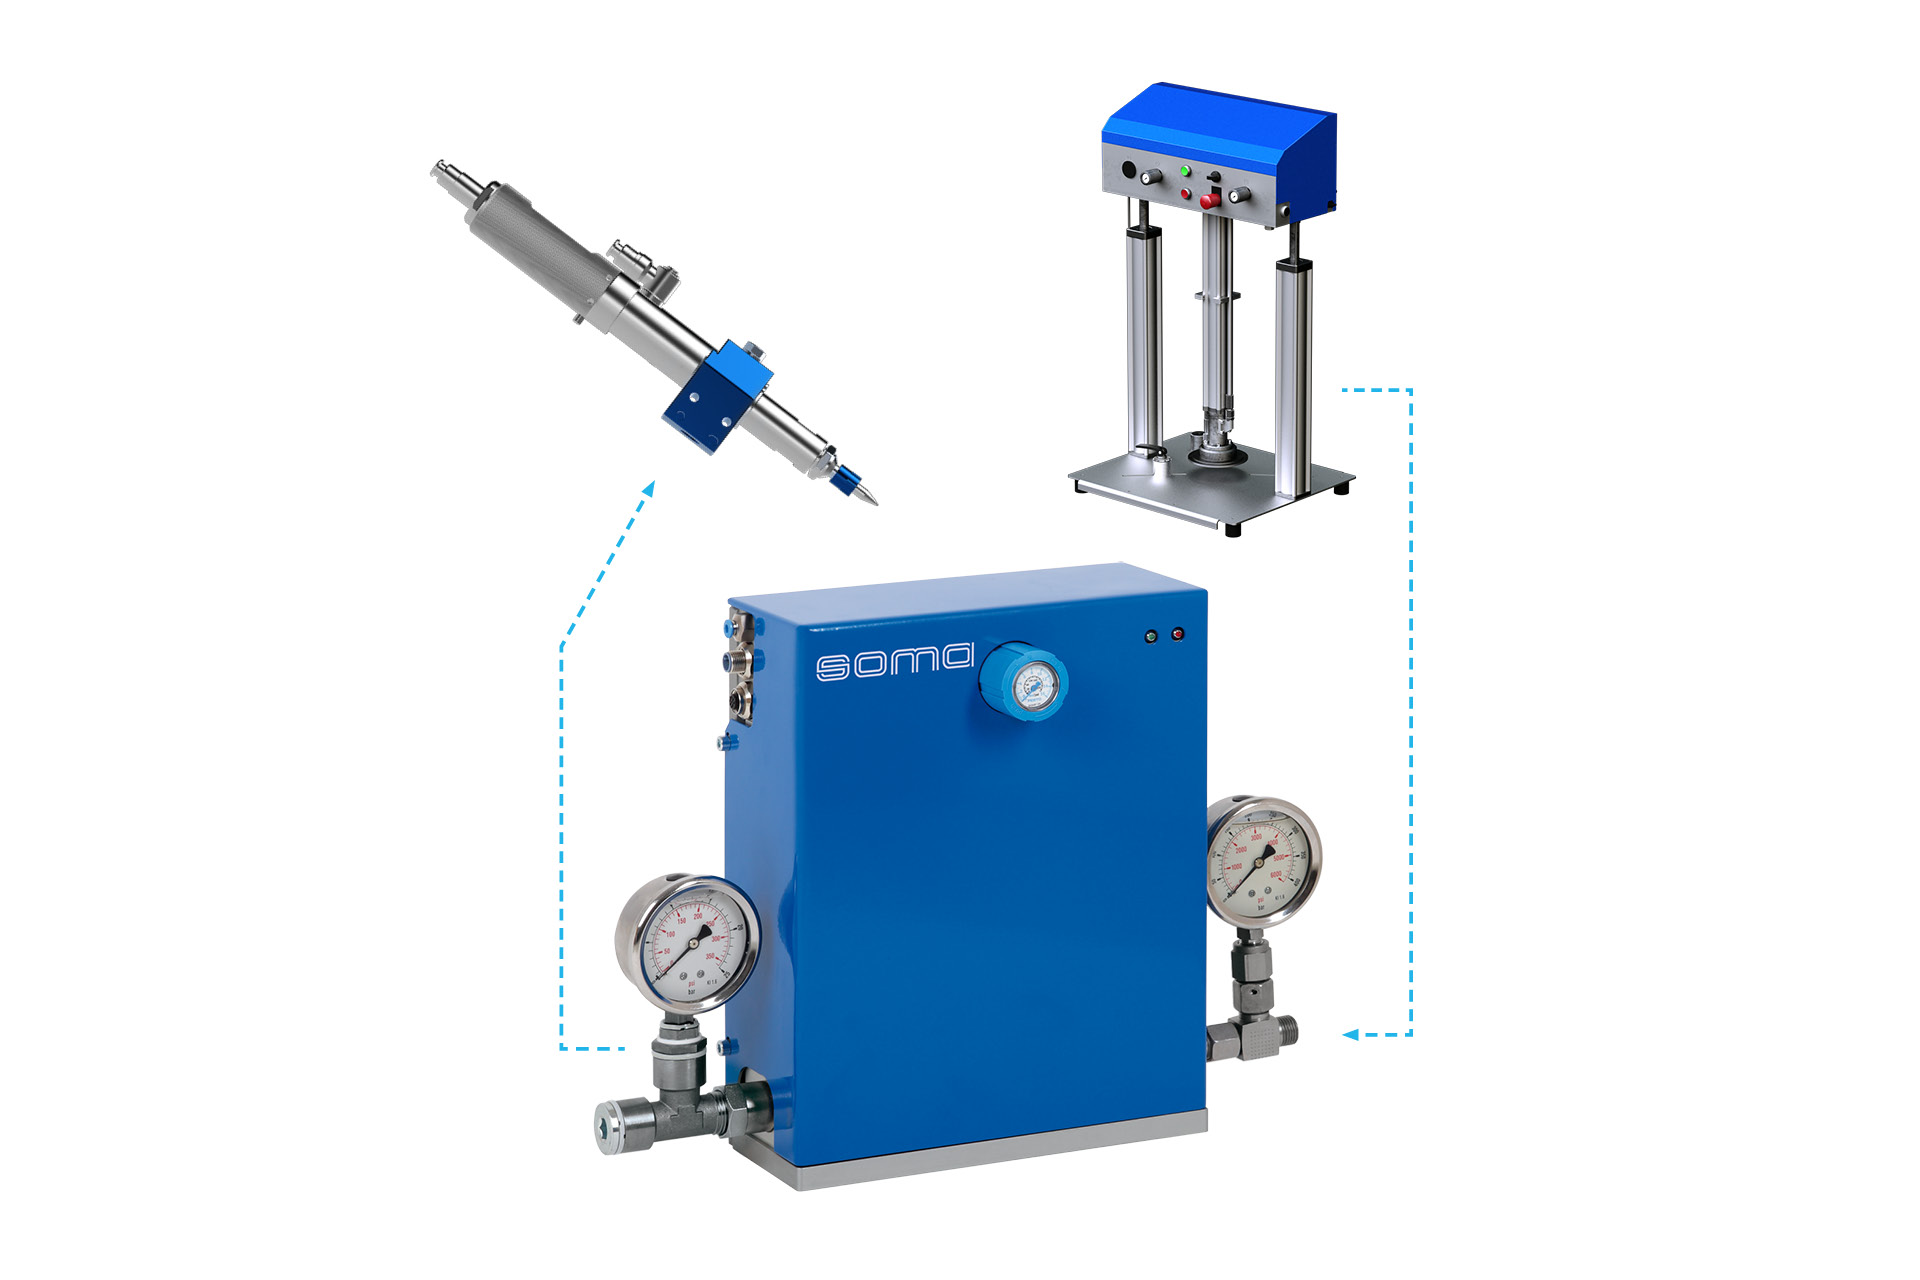 The patented DAS 120/12 pressure balance system from SOMA limits the high feed pressure in supply systems for industrial greases and highly viscous liquids.